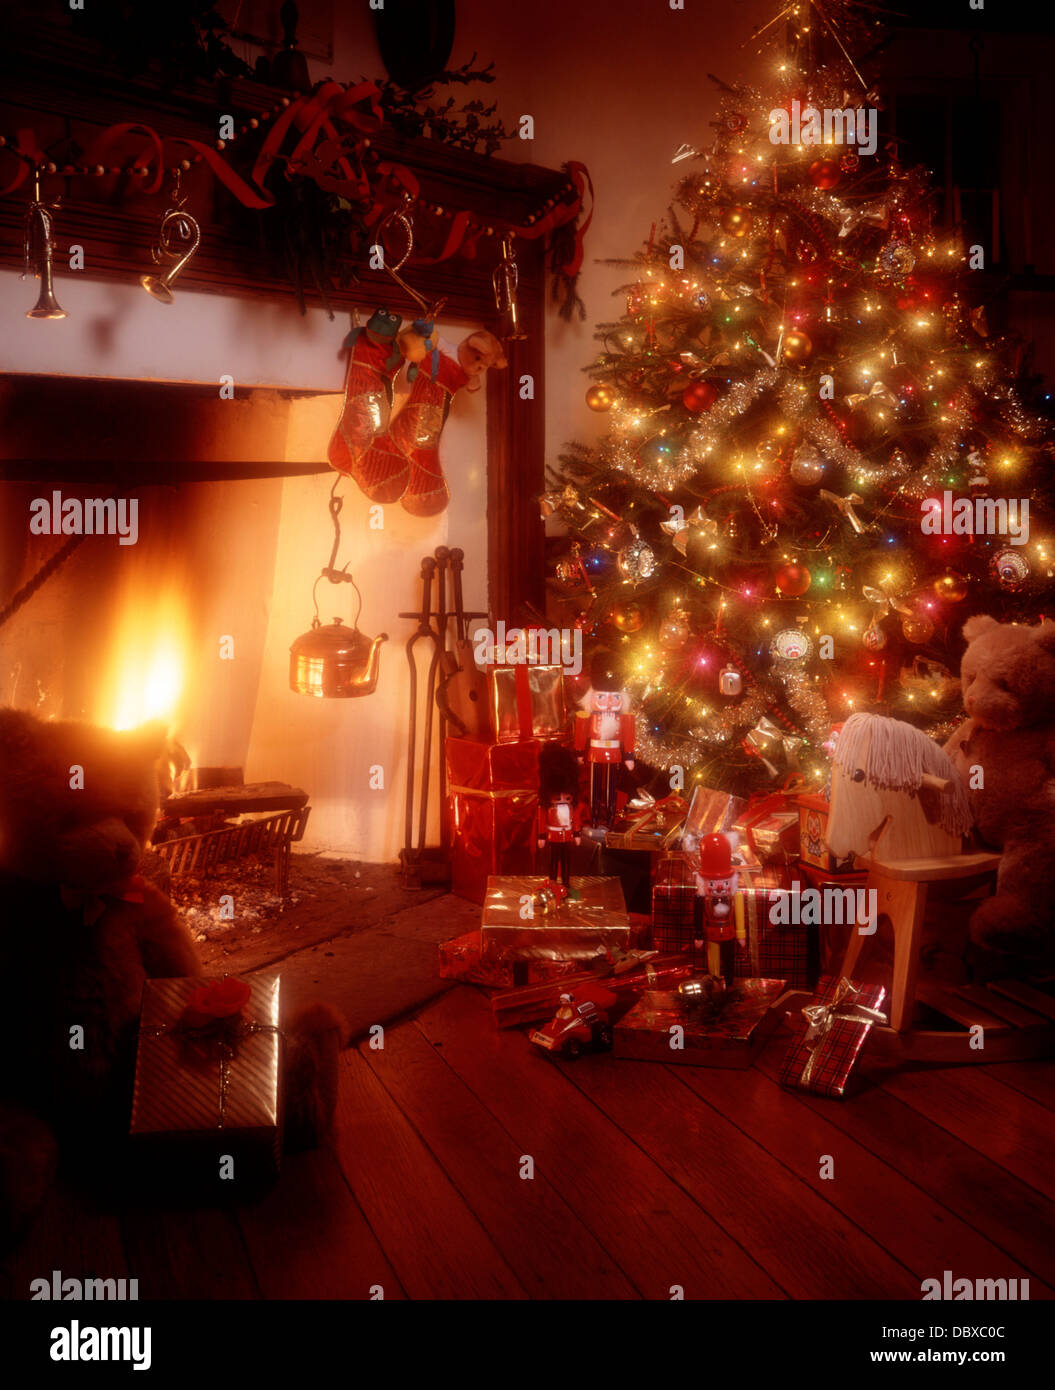 1980s NOSTALGIC CHRISTMAS TREE STANDING BESIDE COLONIAL FIREPLACE Stock Photo